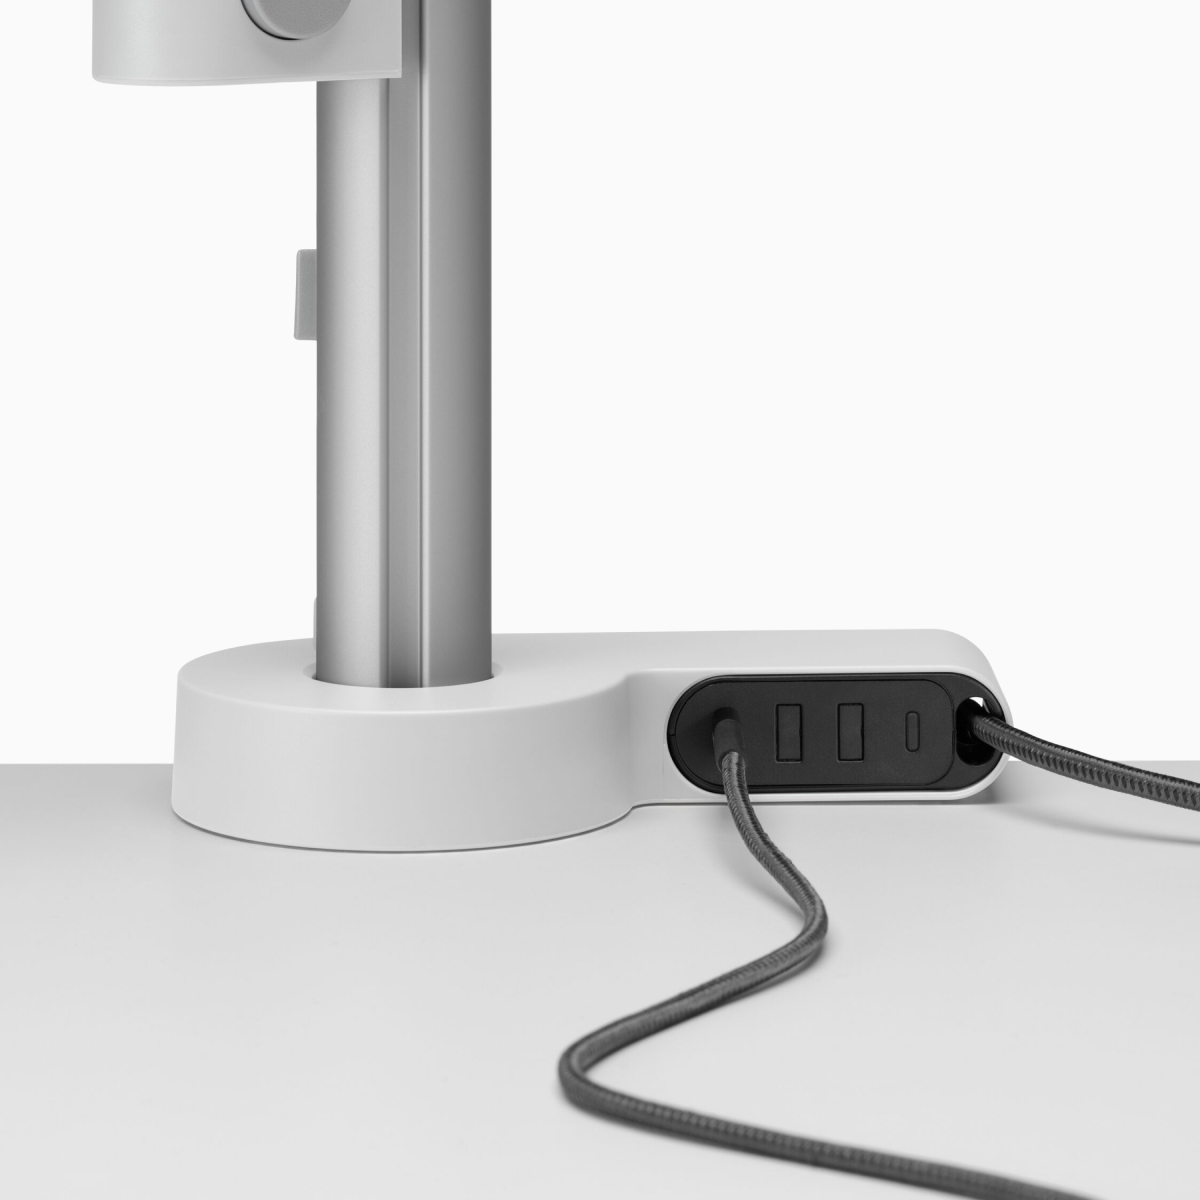 A desk with a power and data cable connected to an Ondo Connectivity Module.